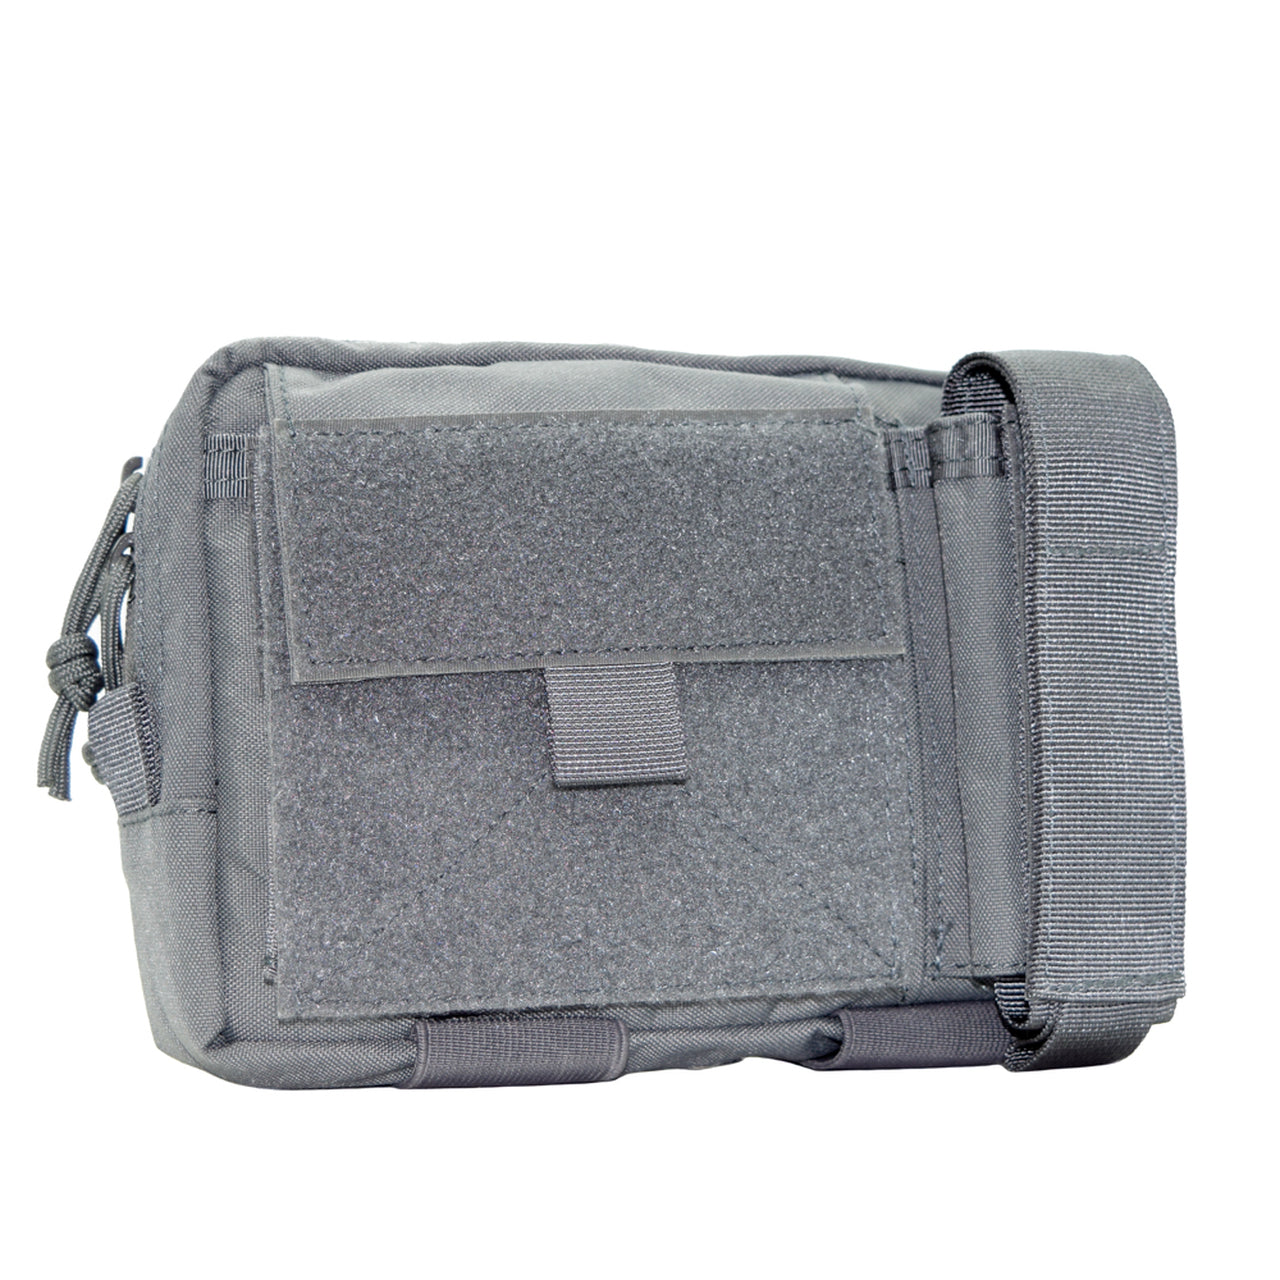 A Shellback Tactical Super Admin Pouch with a zipper on the side.